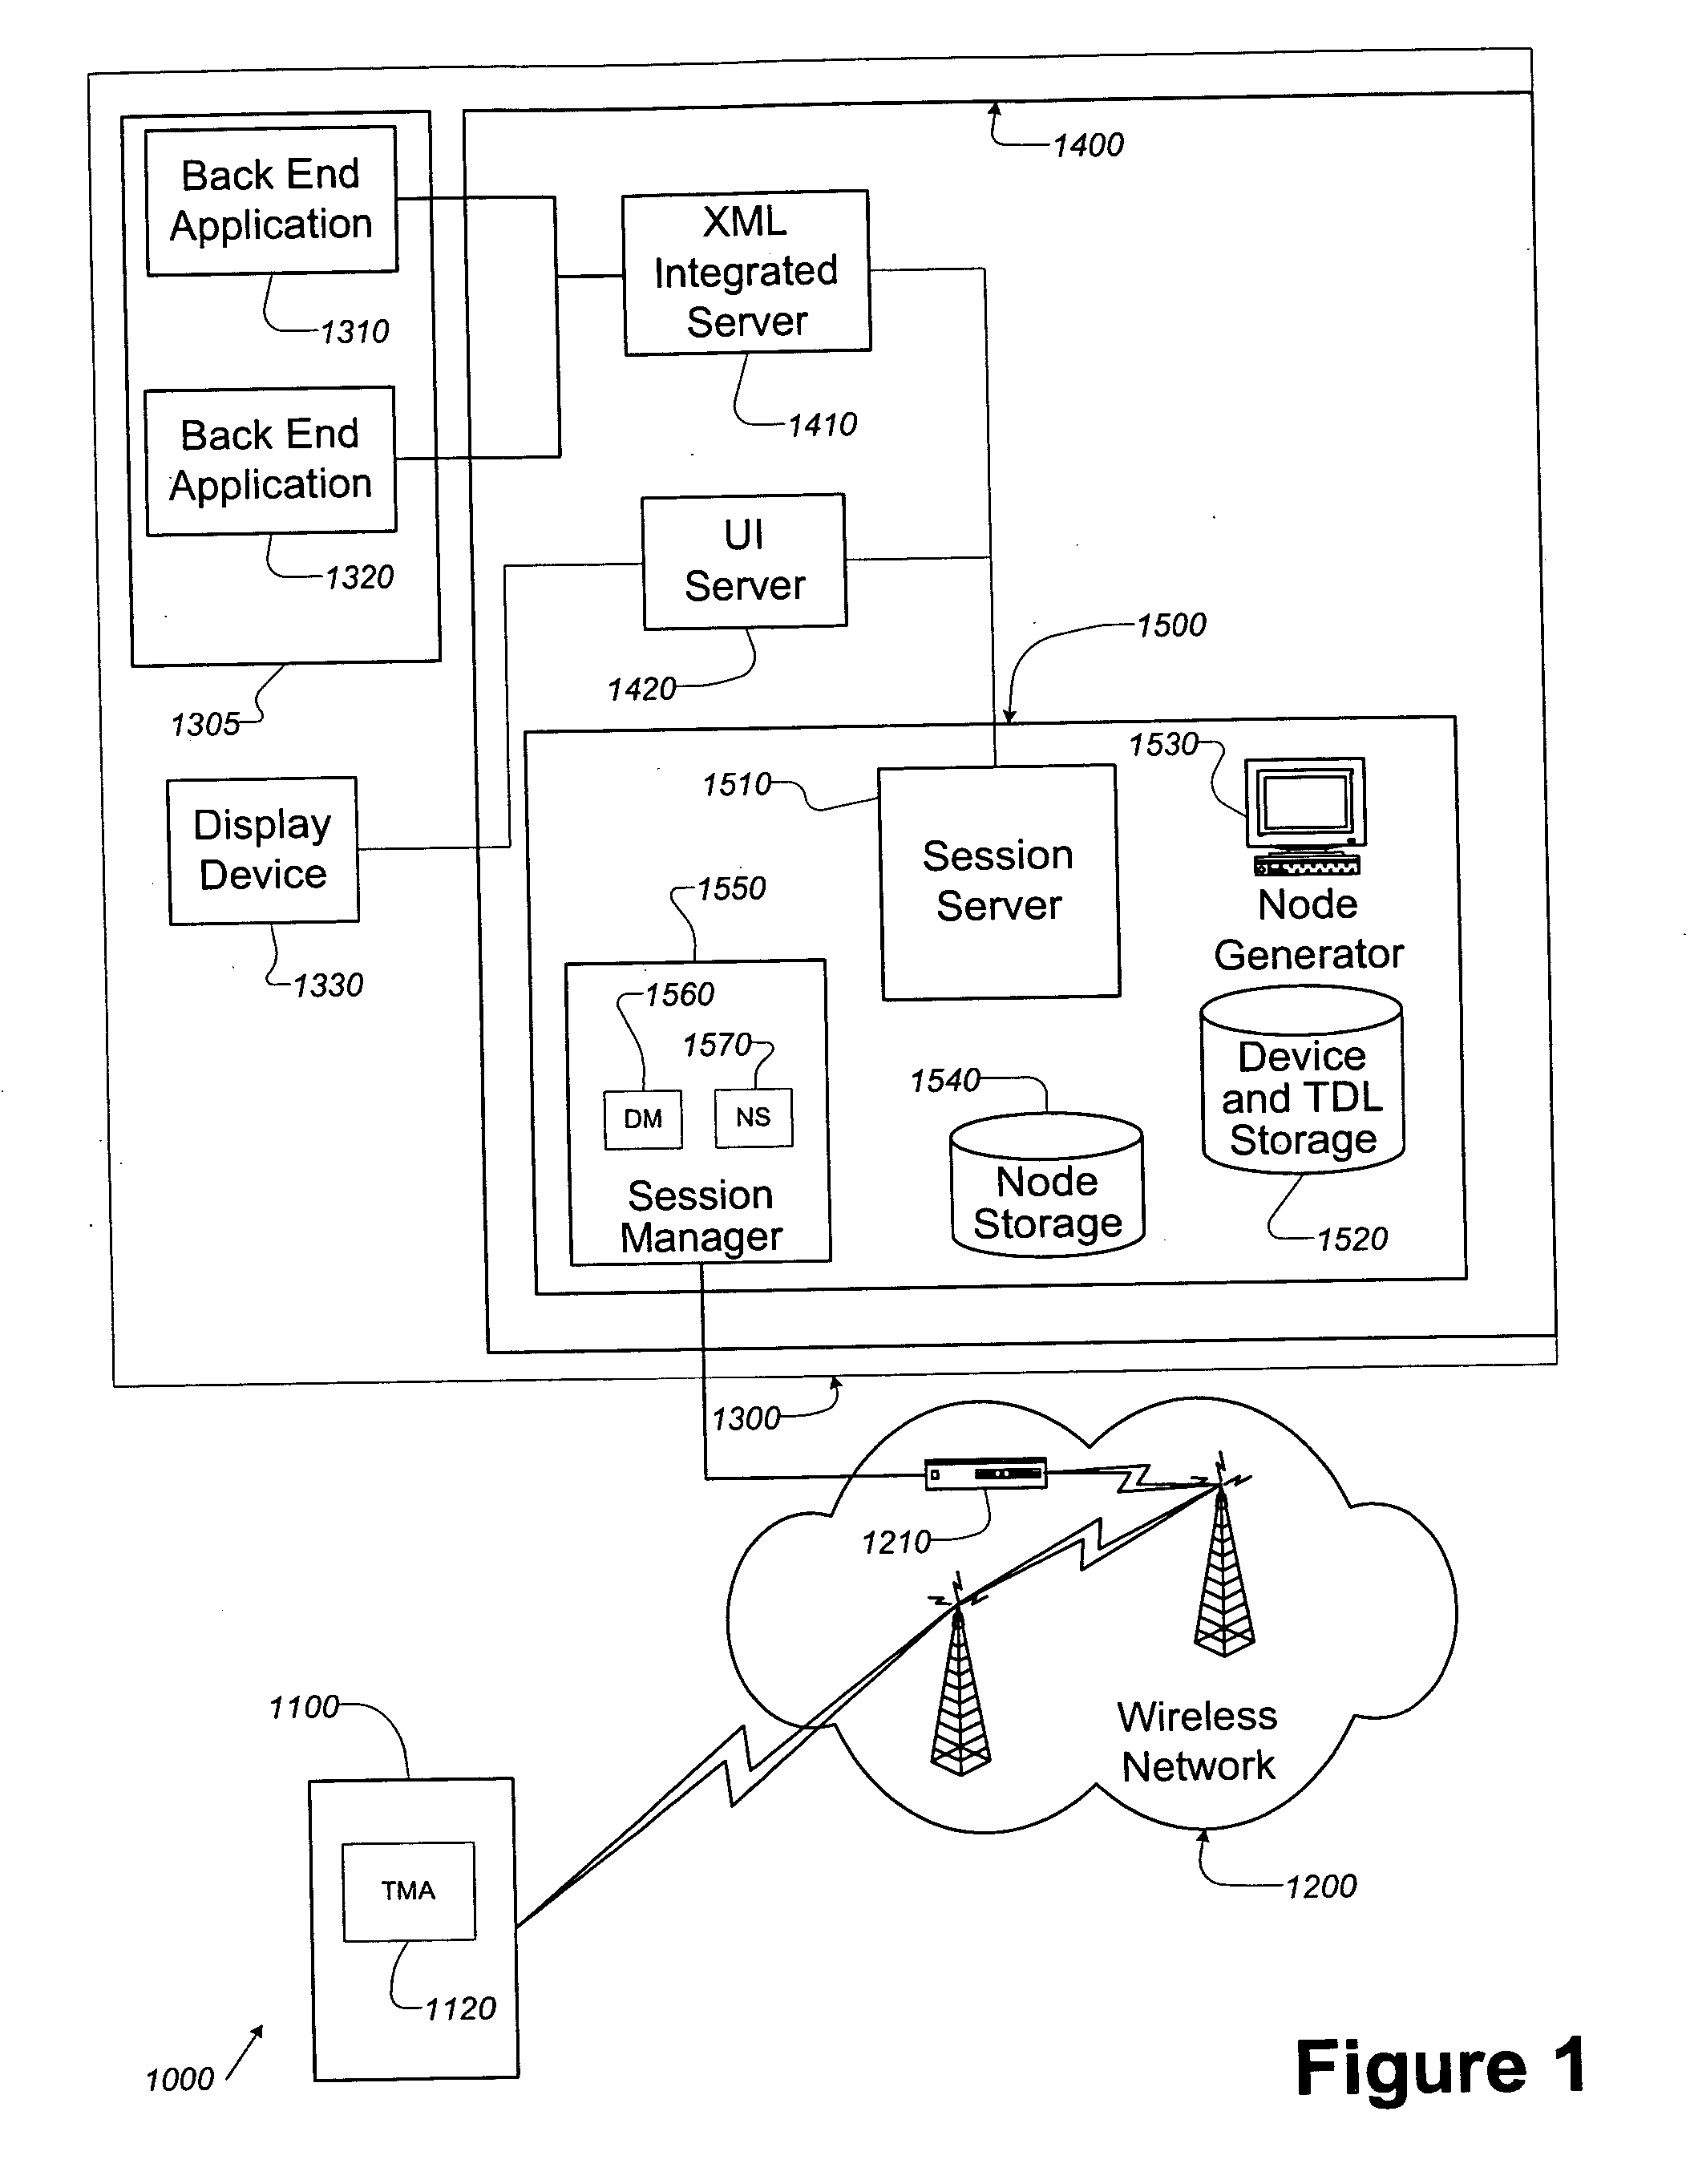 System for extending business systems to a mobile workforce